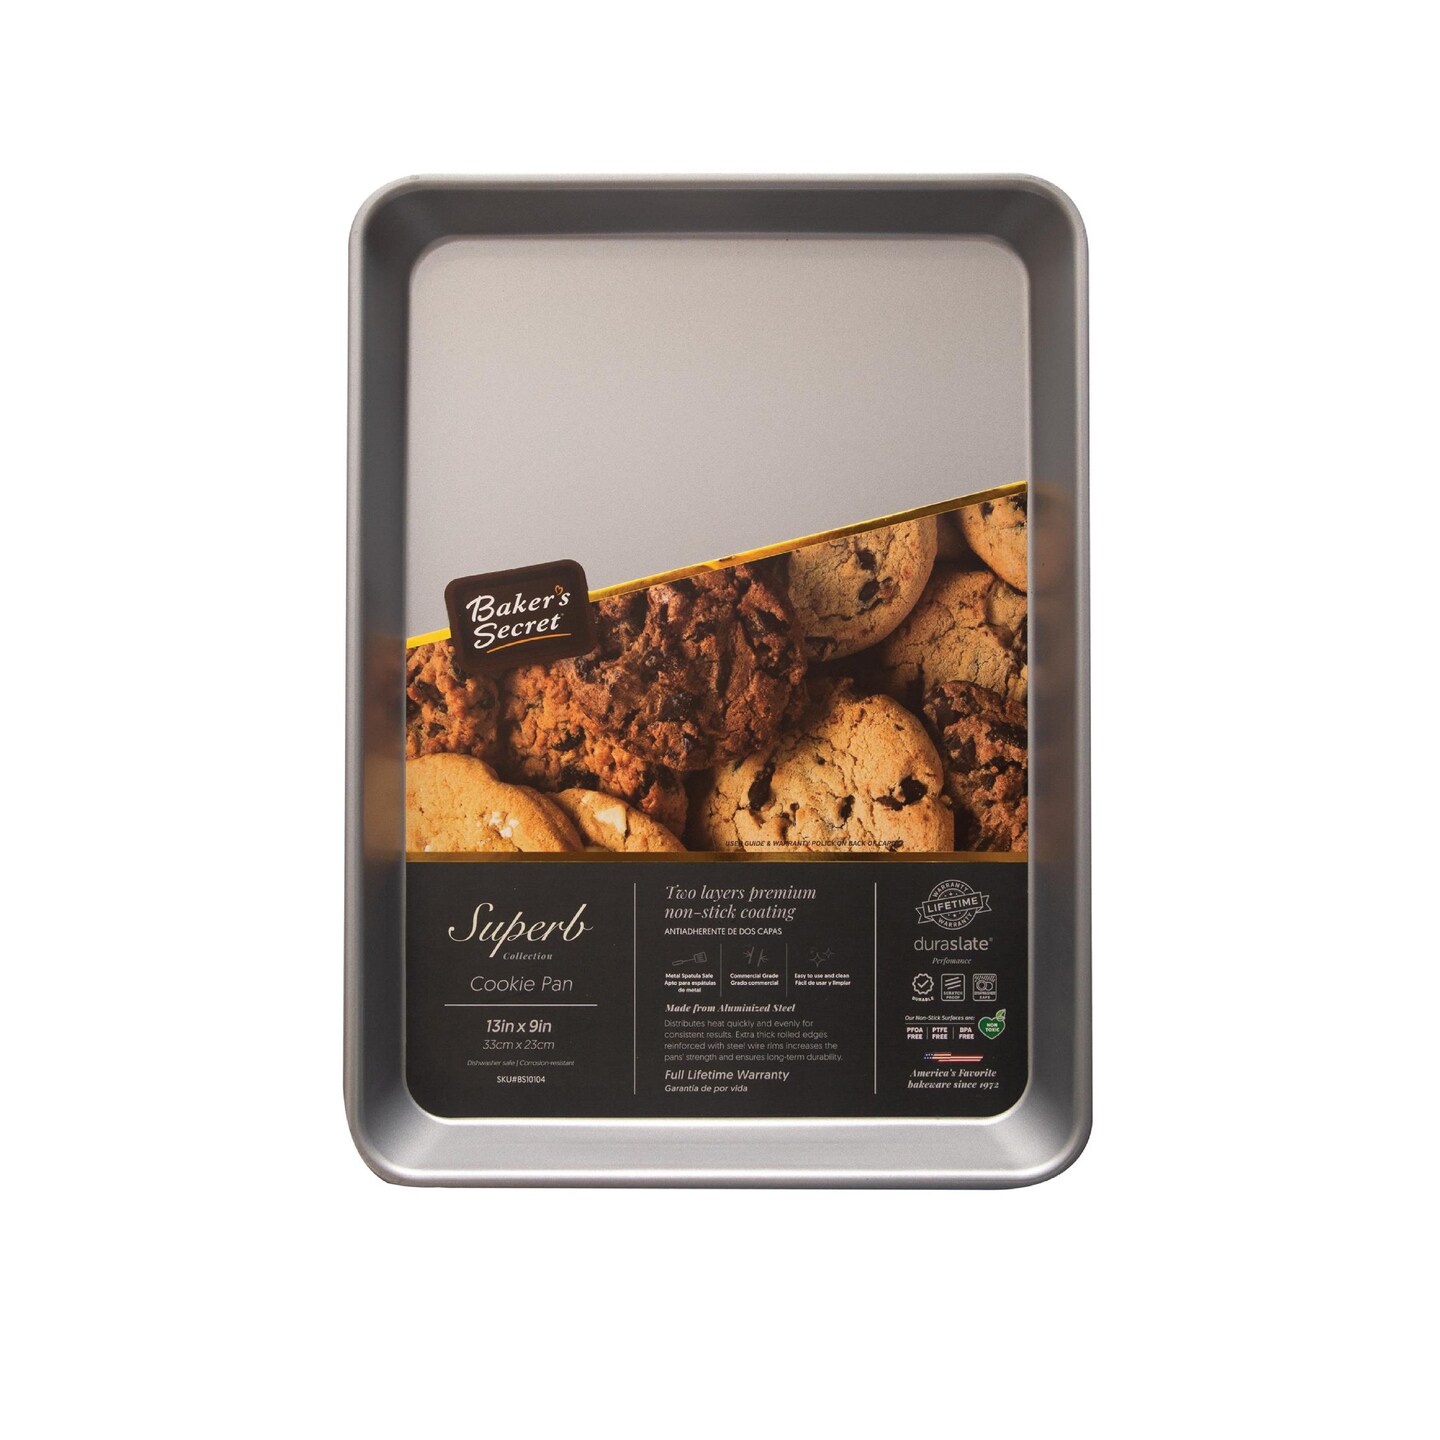 Bakers Secret Cookie Pan, Small, Gagets